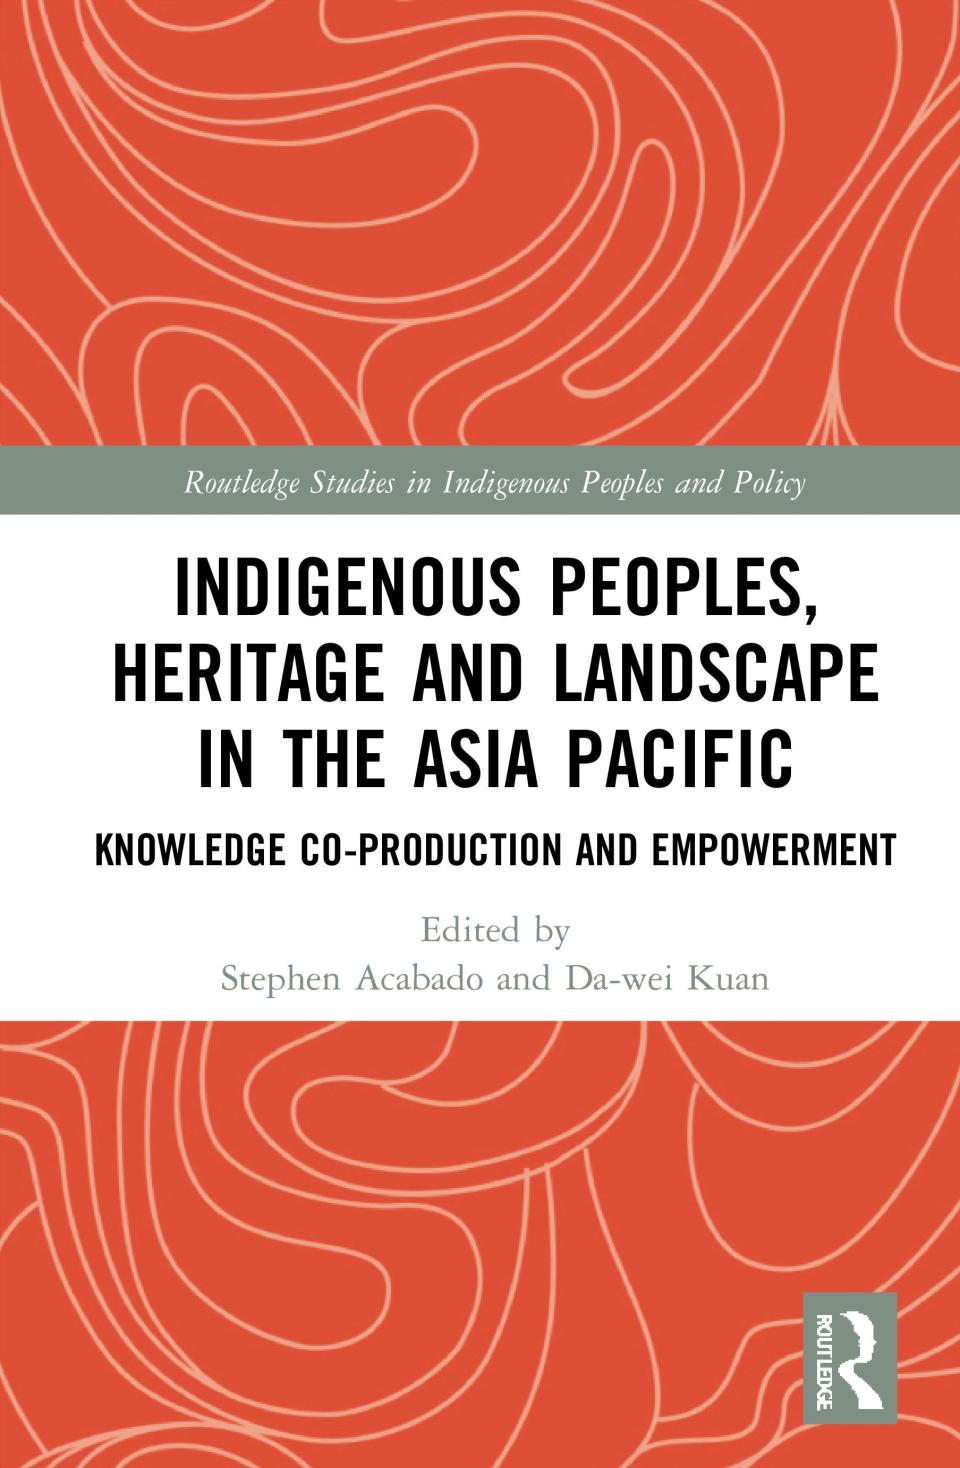 《Indigenous_Peoples,_Heritage_and_Landscape_in_the_Asia_Pacific_Knowledge_Co-Production_and_Empowerment》(（亞太地區原住民族、遺跡和景觀：知識共同產出和賦權）)一書封面(UCLA提供)